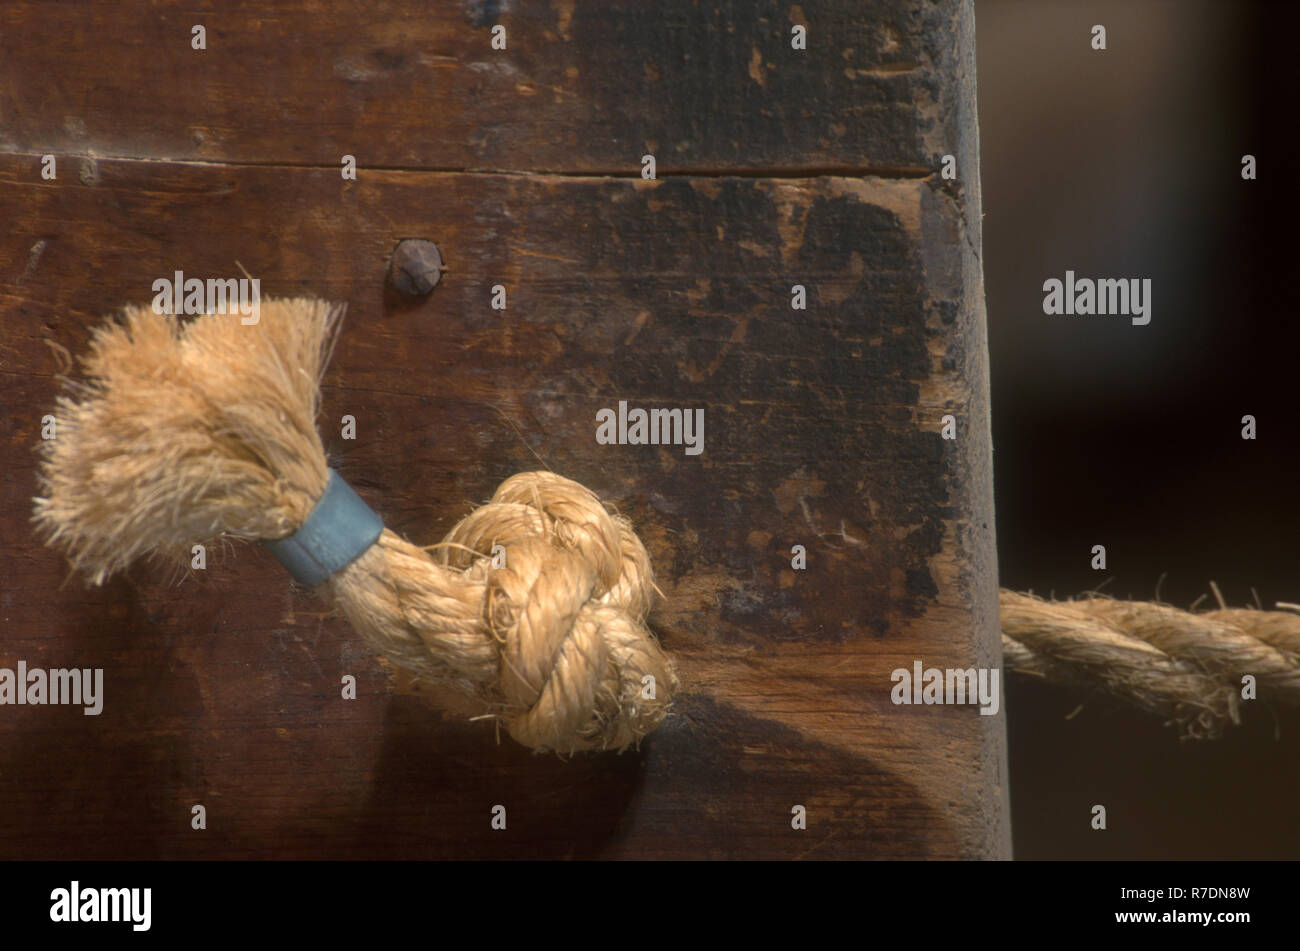 KNOTTED ROPE IN PIECE OF TIMBER Stock Photo